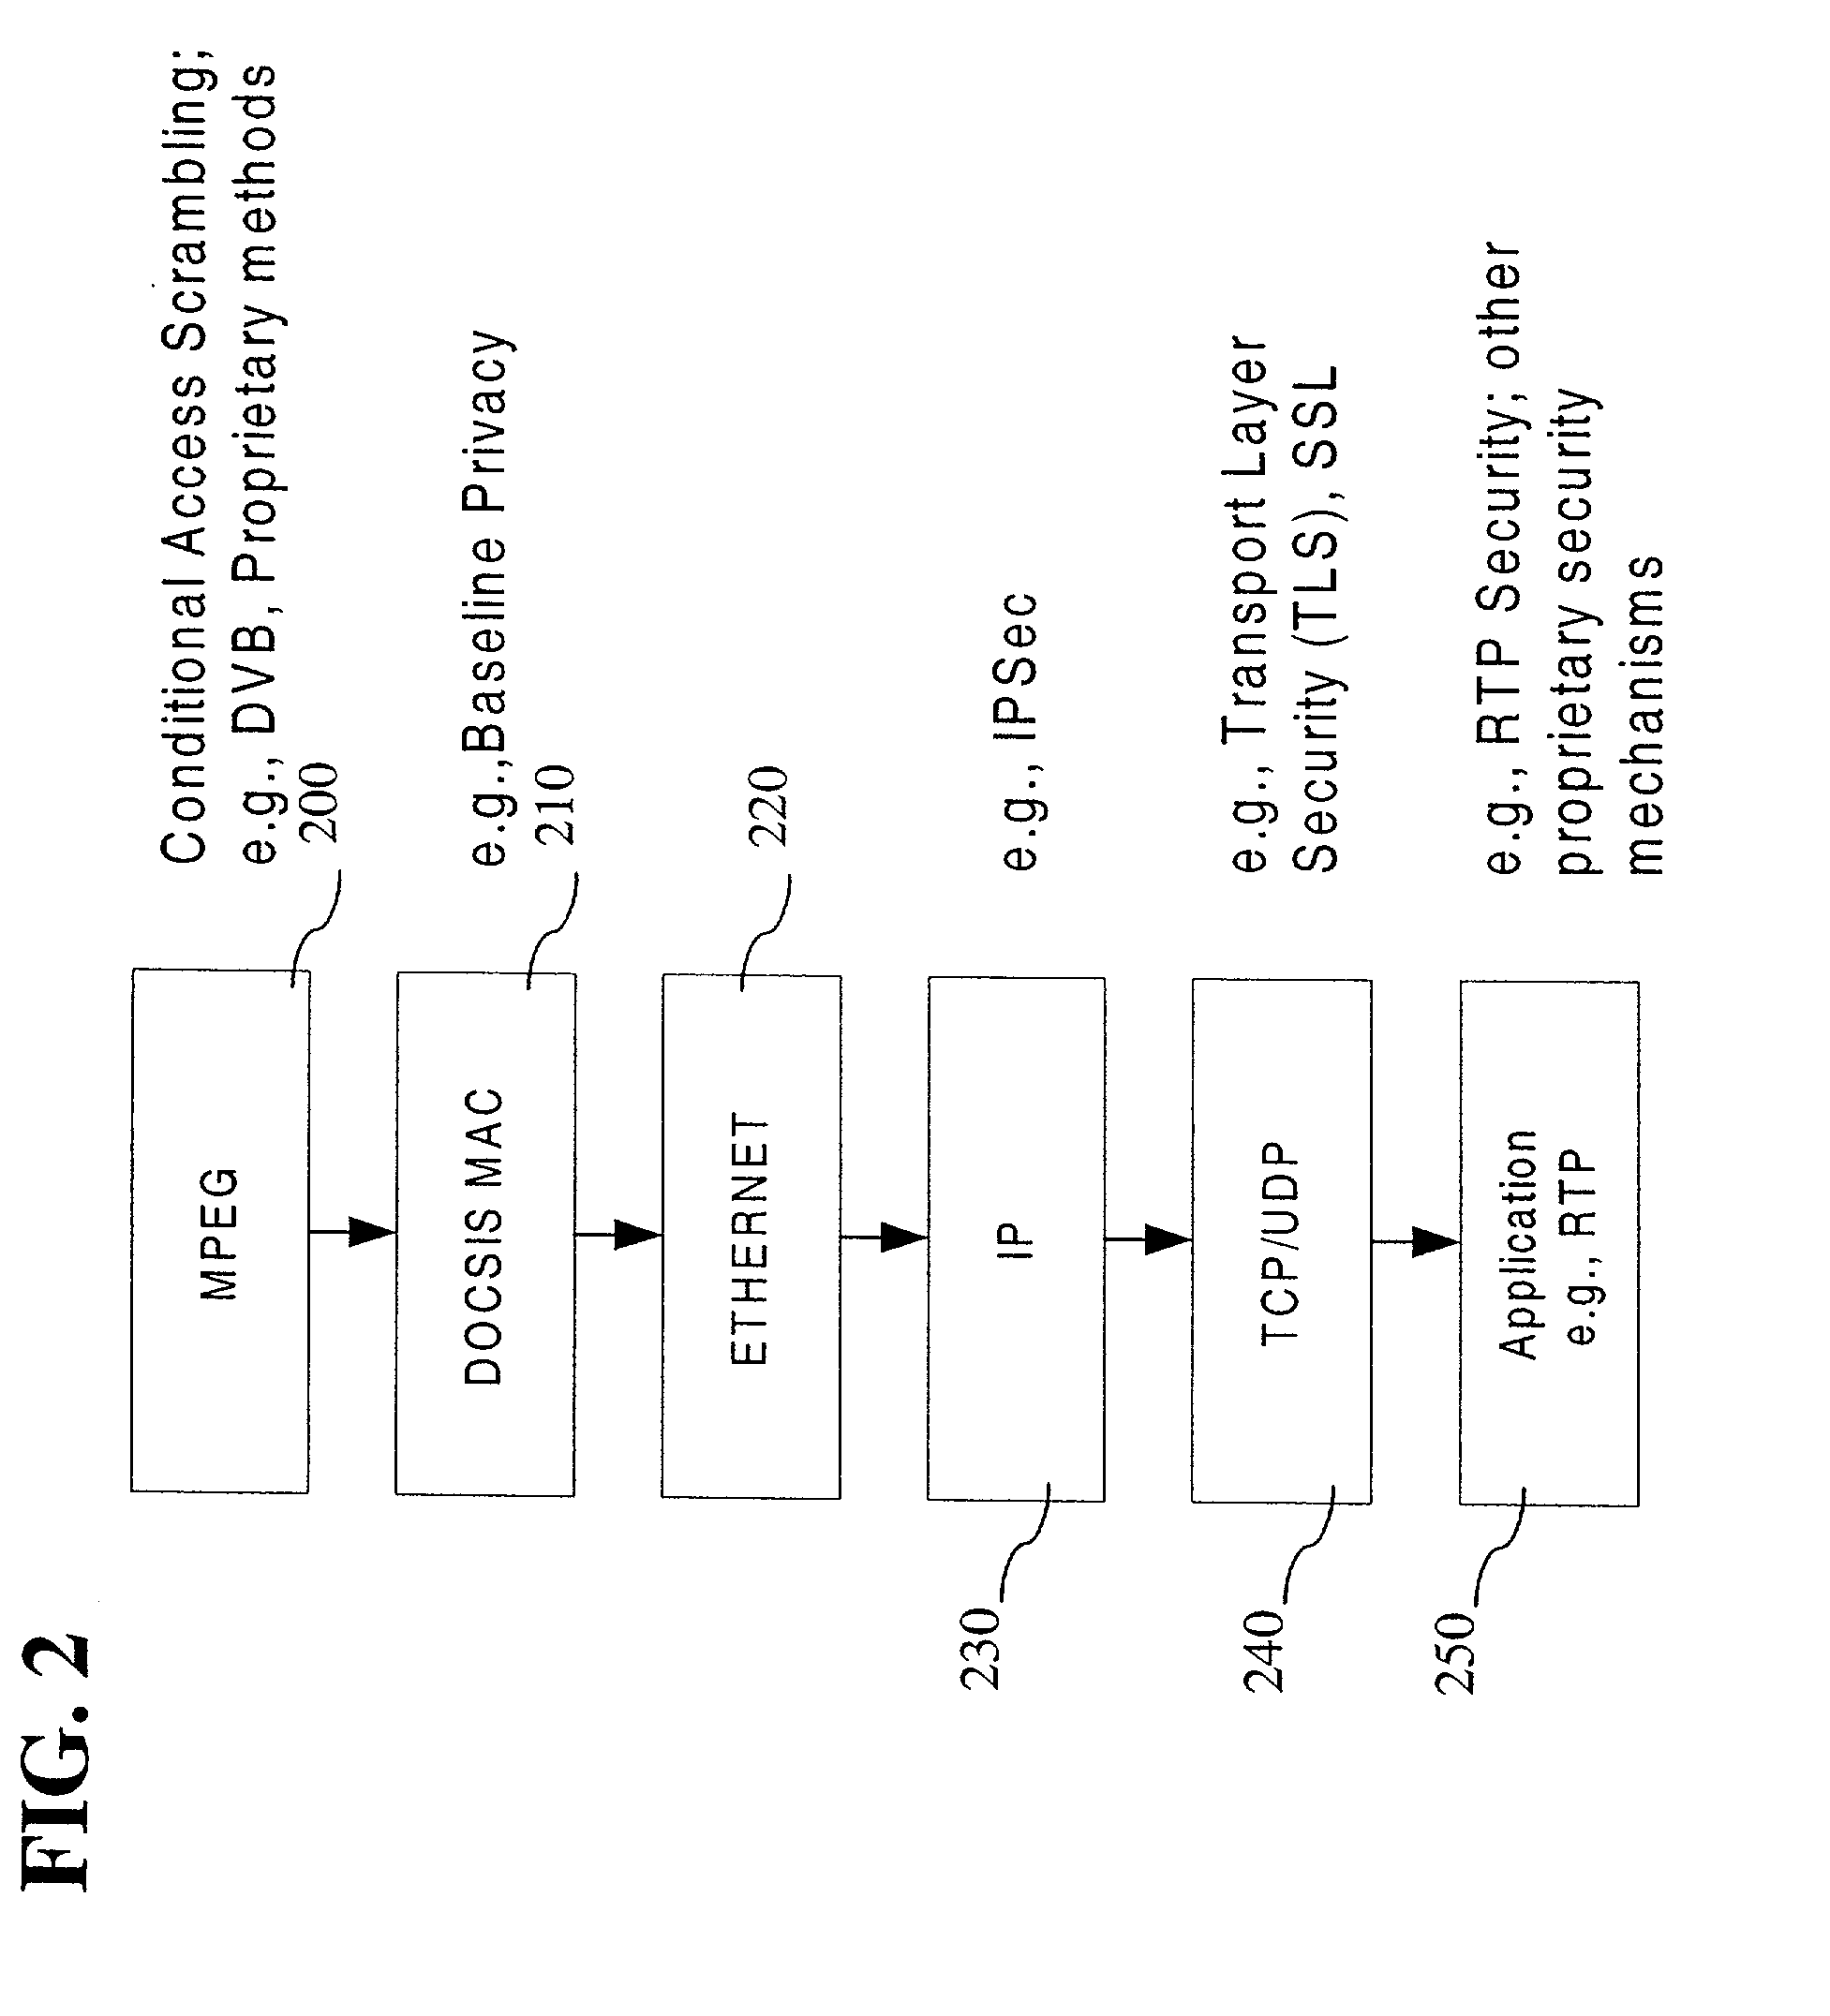 Method for processing multiple security policies applied to a data packet structure